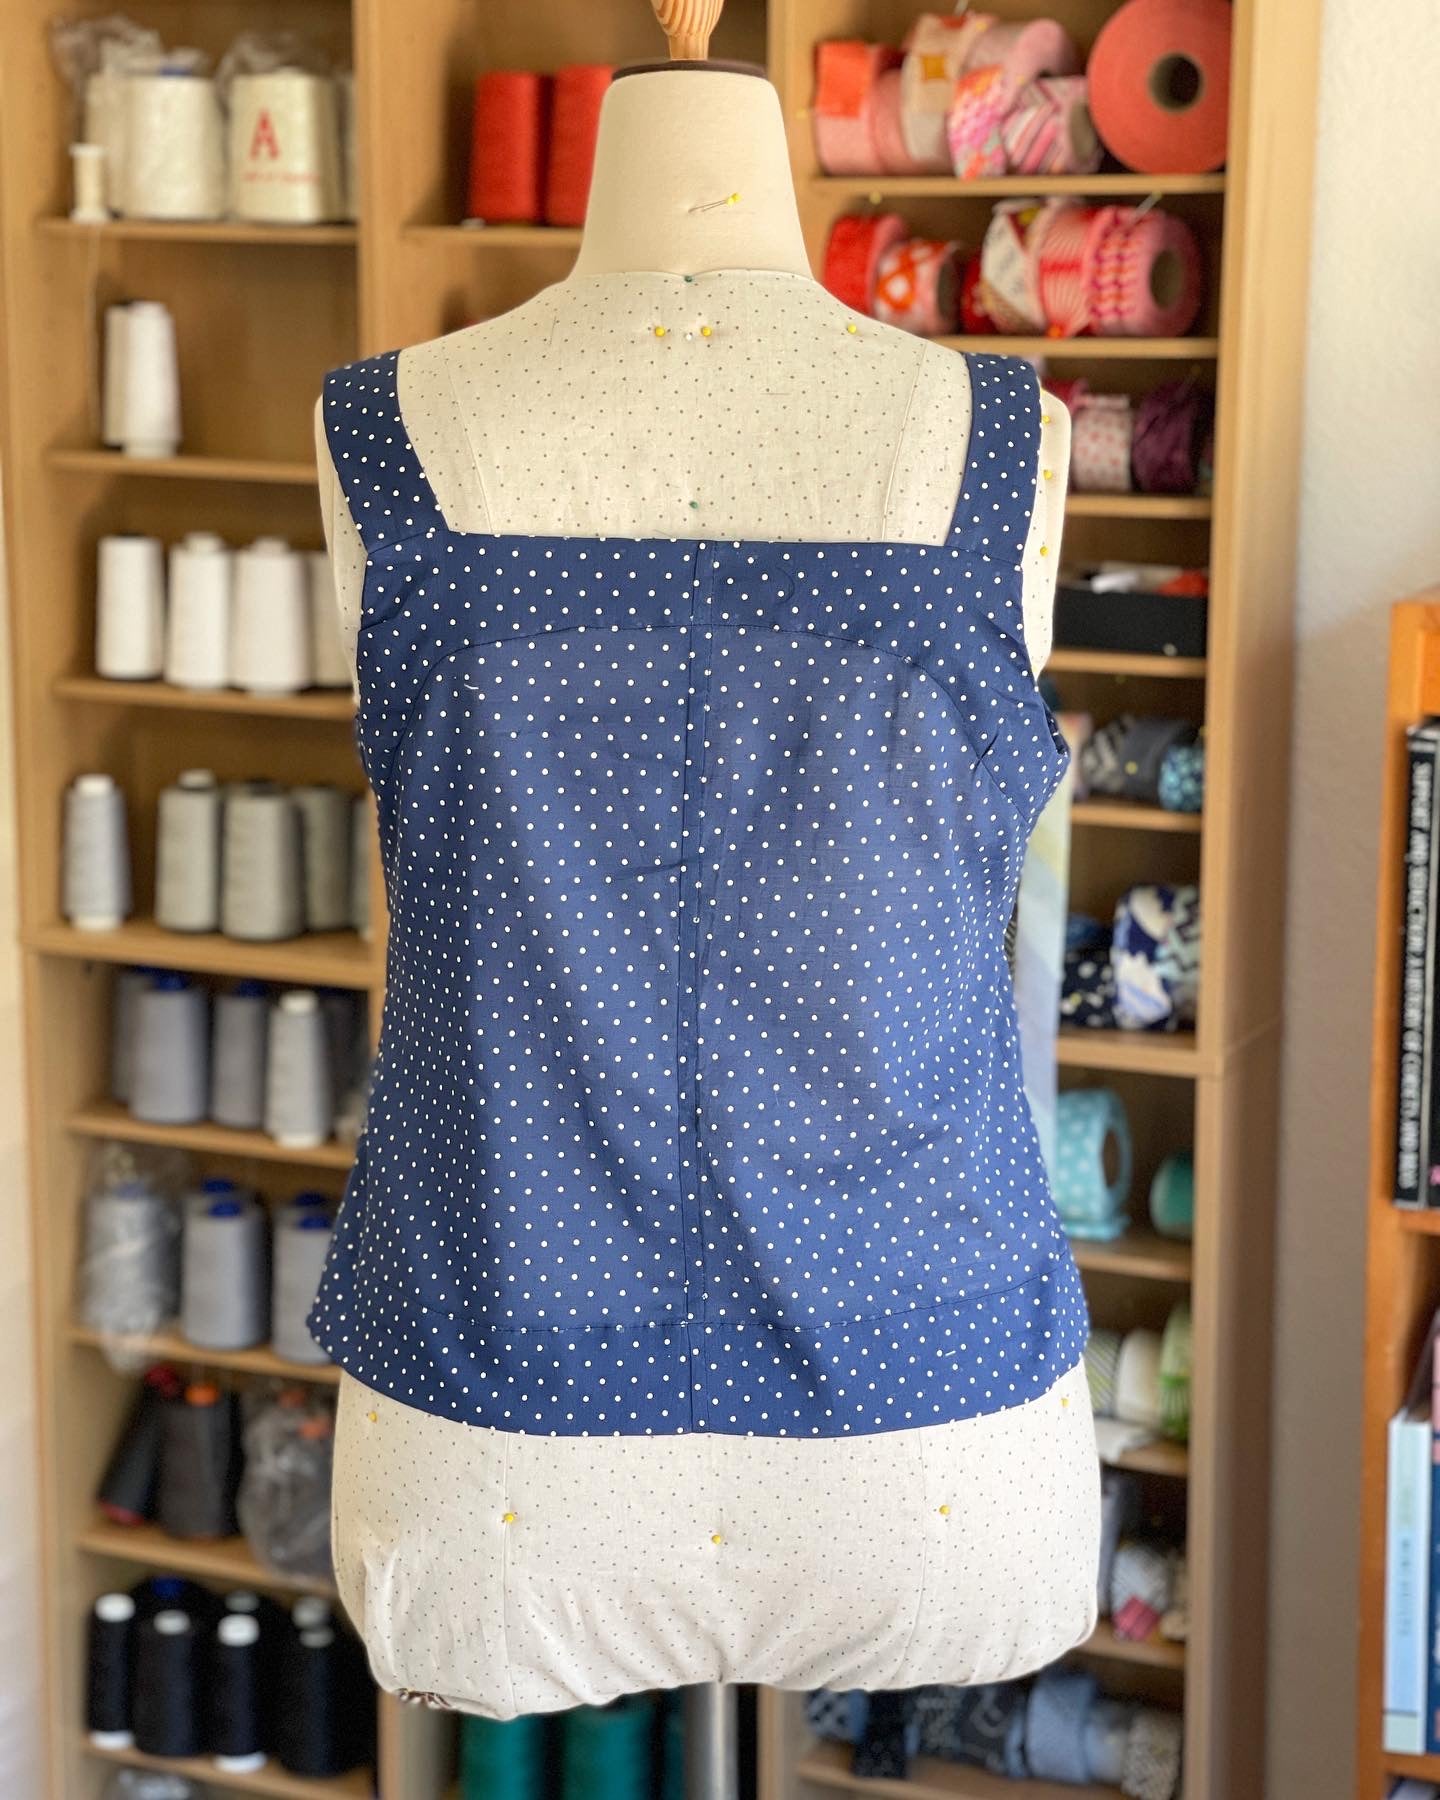 Best Sewing Projects for Beginners » Helen's Closet Patterns